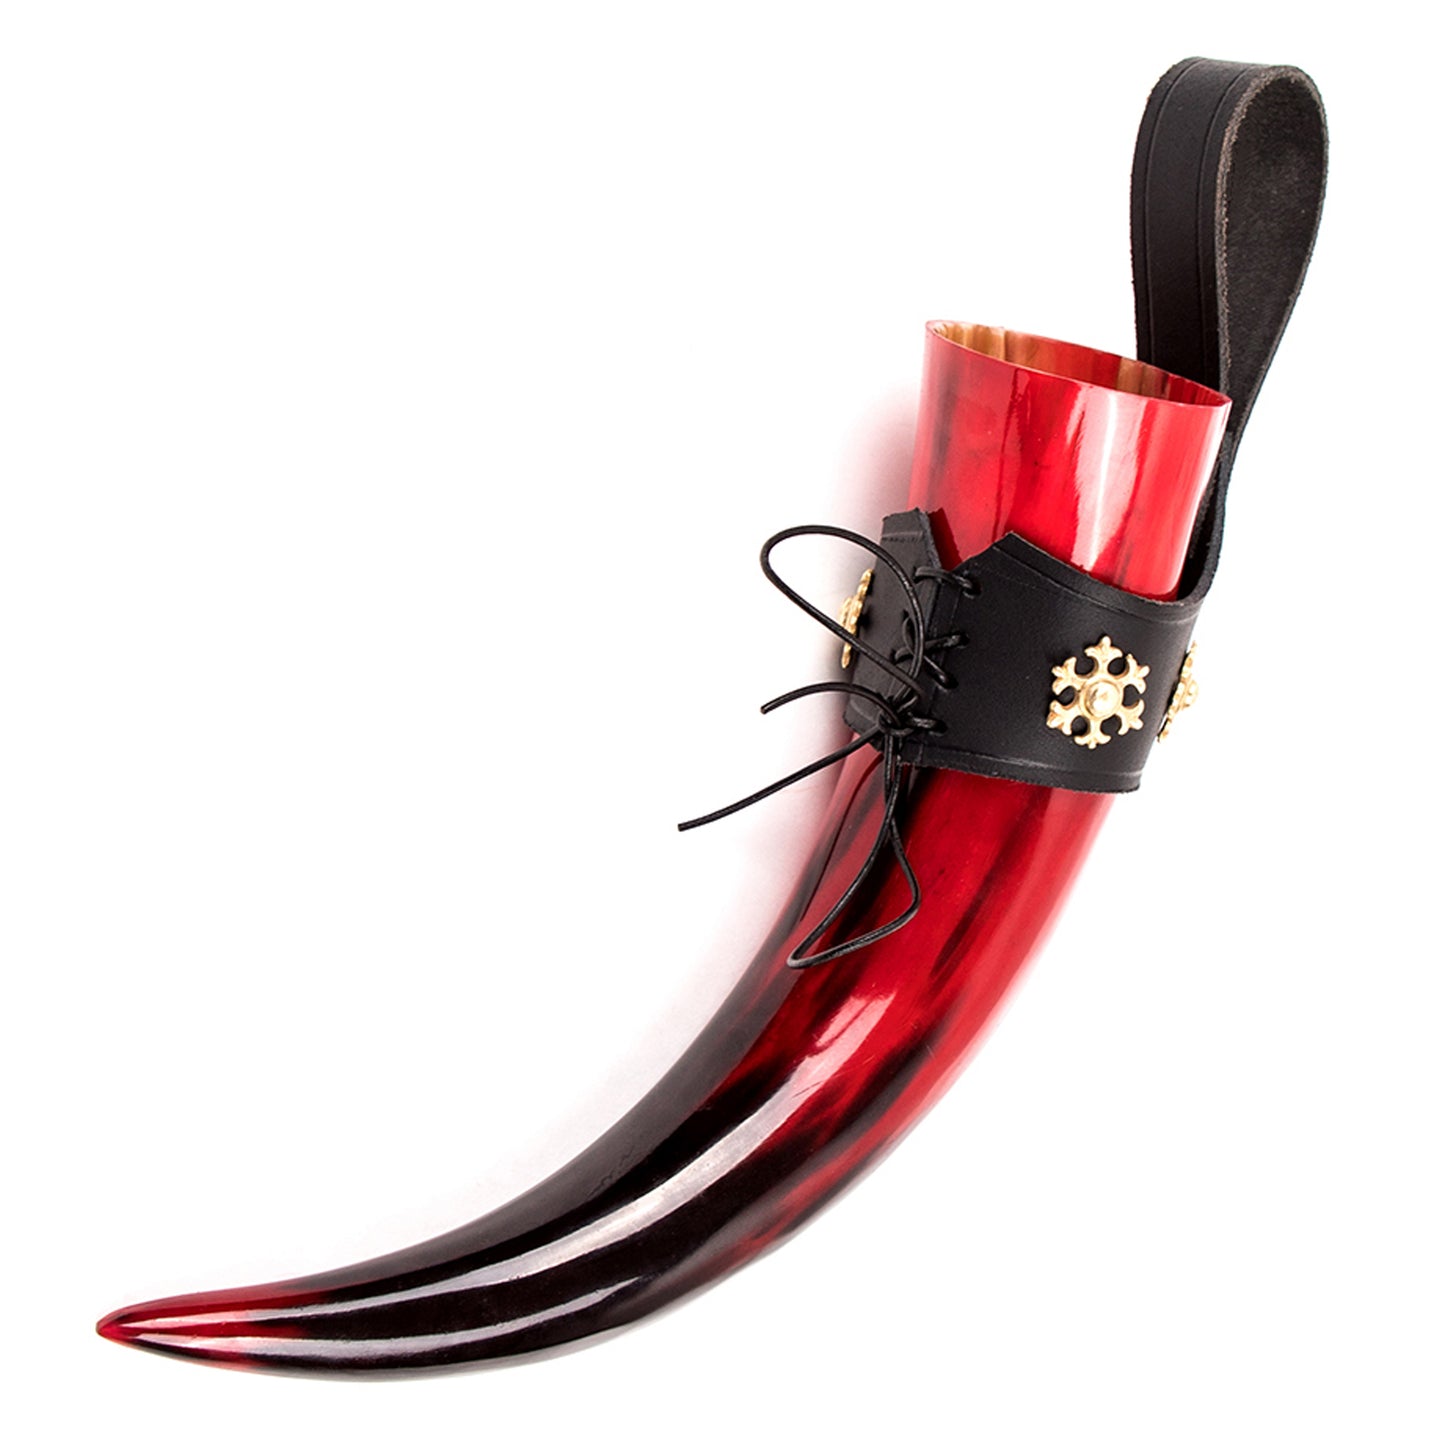 Fantasy Drinking Horn "The Red Witch"